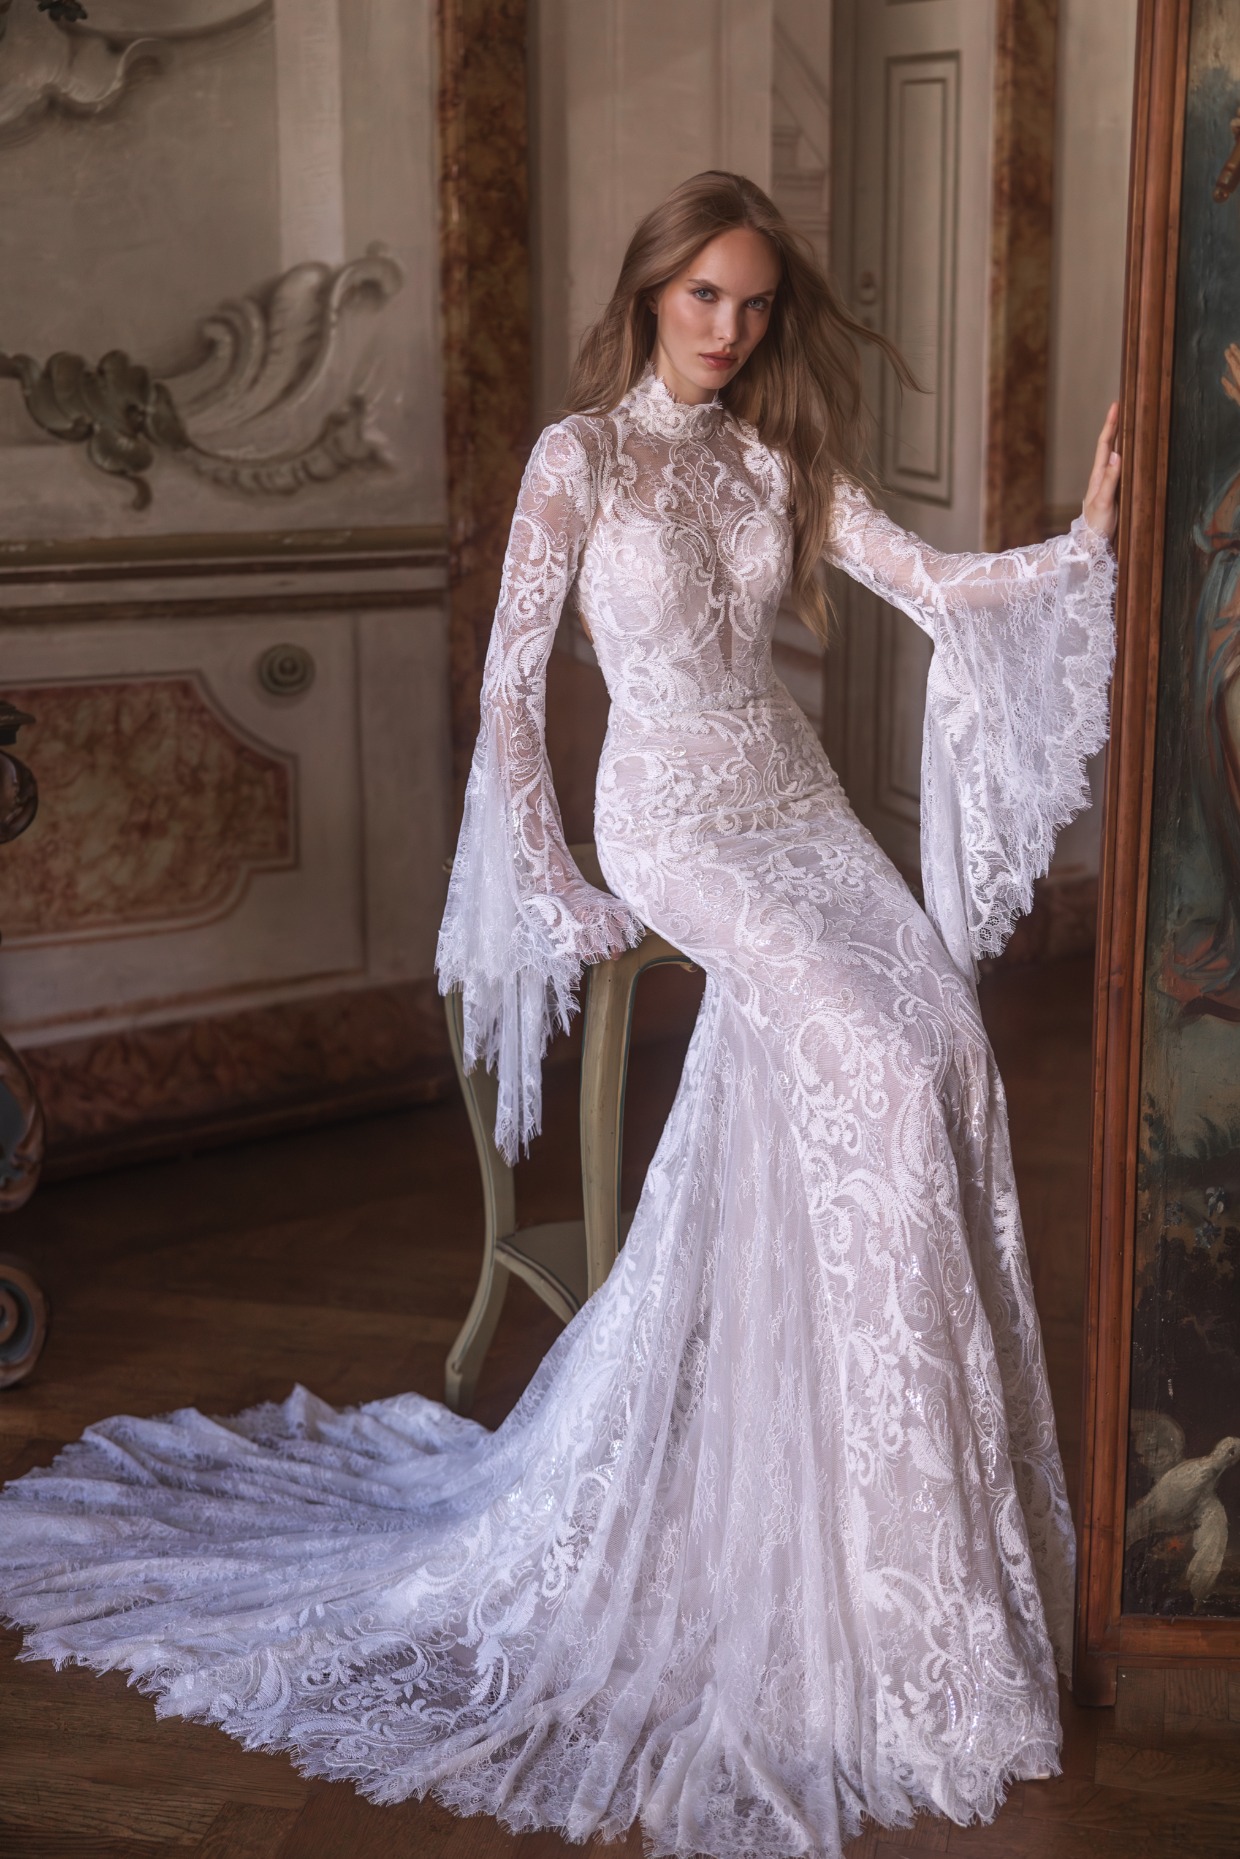 Introducing Yedyna, a sexy new collection for the modern bride